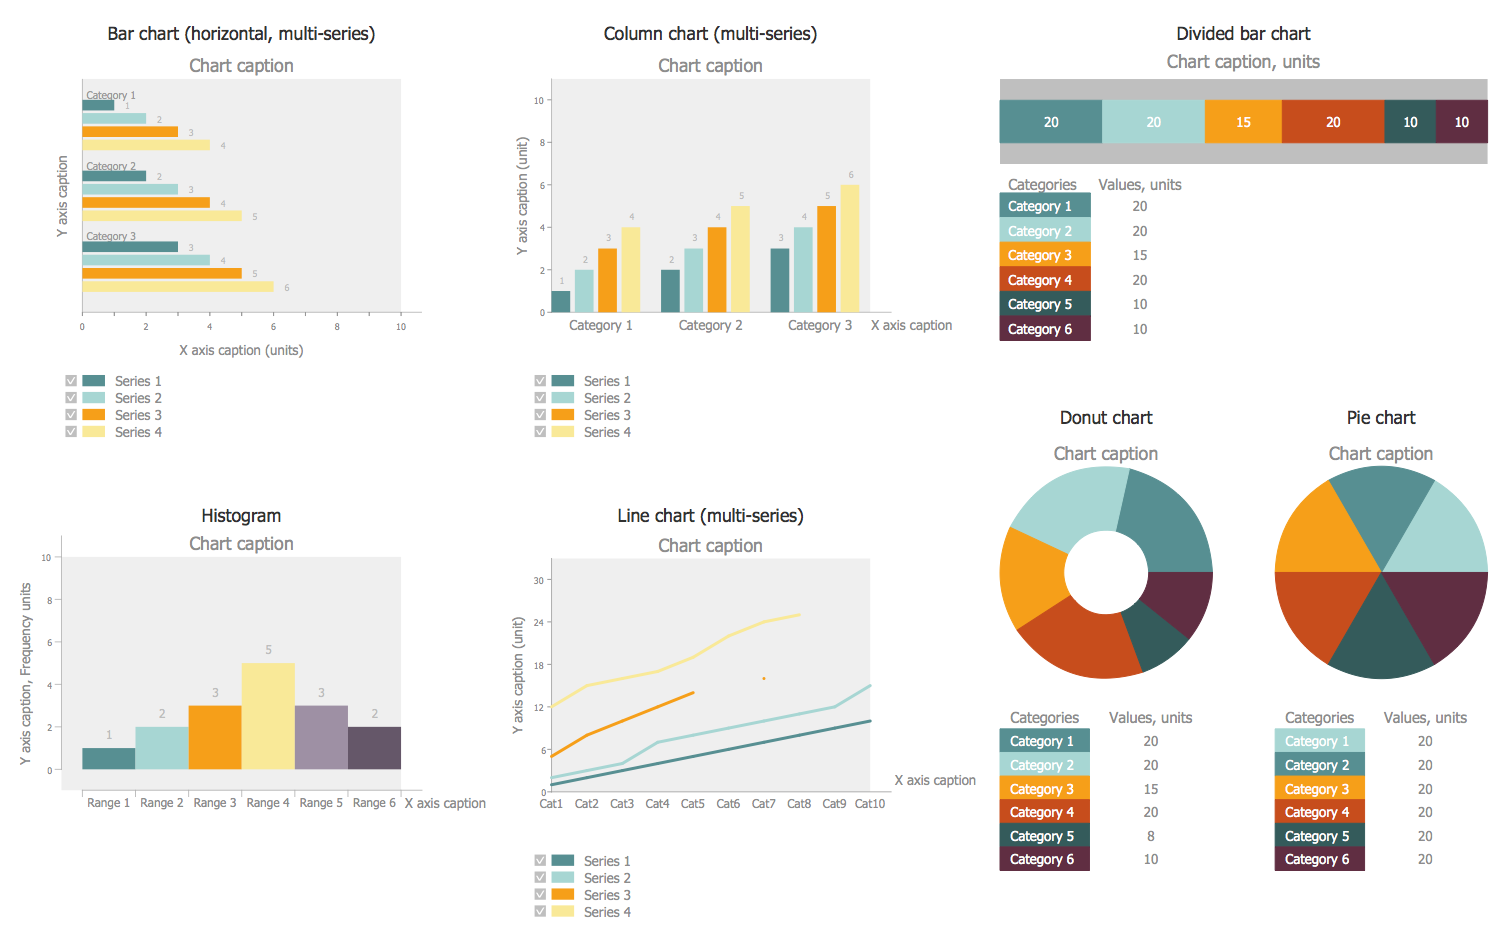 Our Quality, Security, and Logistics KPI Dashboard - Overhaul